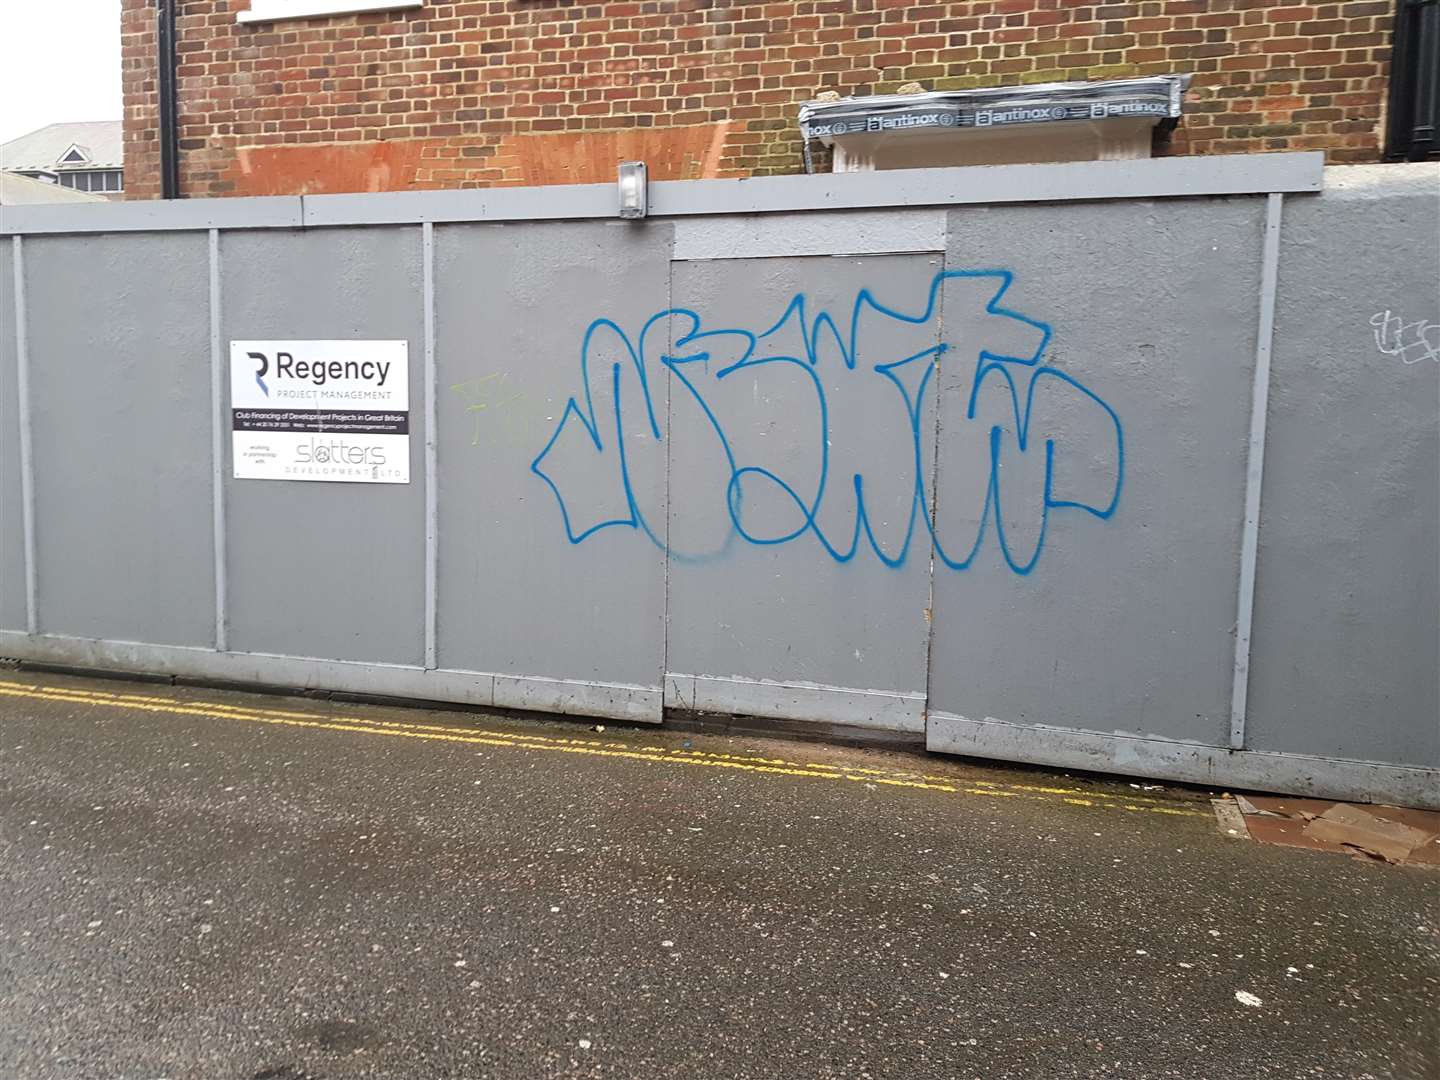 One of the familiar tags (6532202)